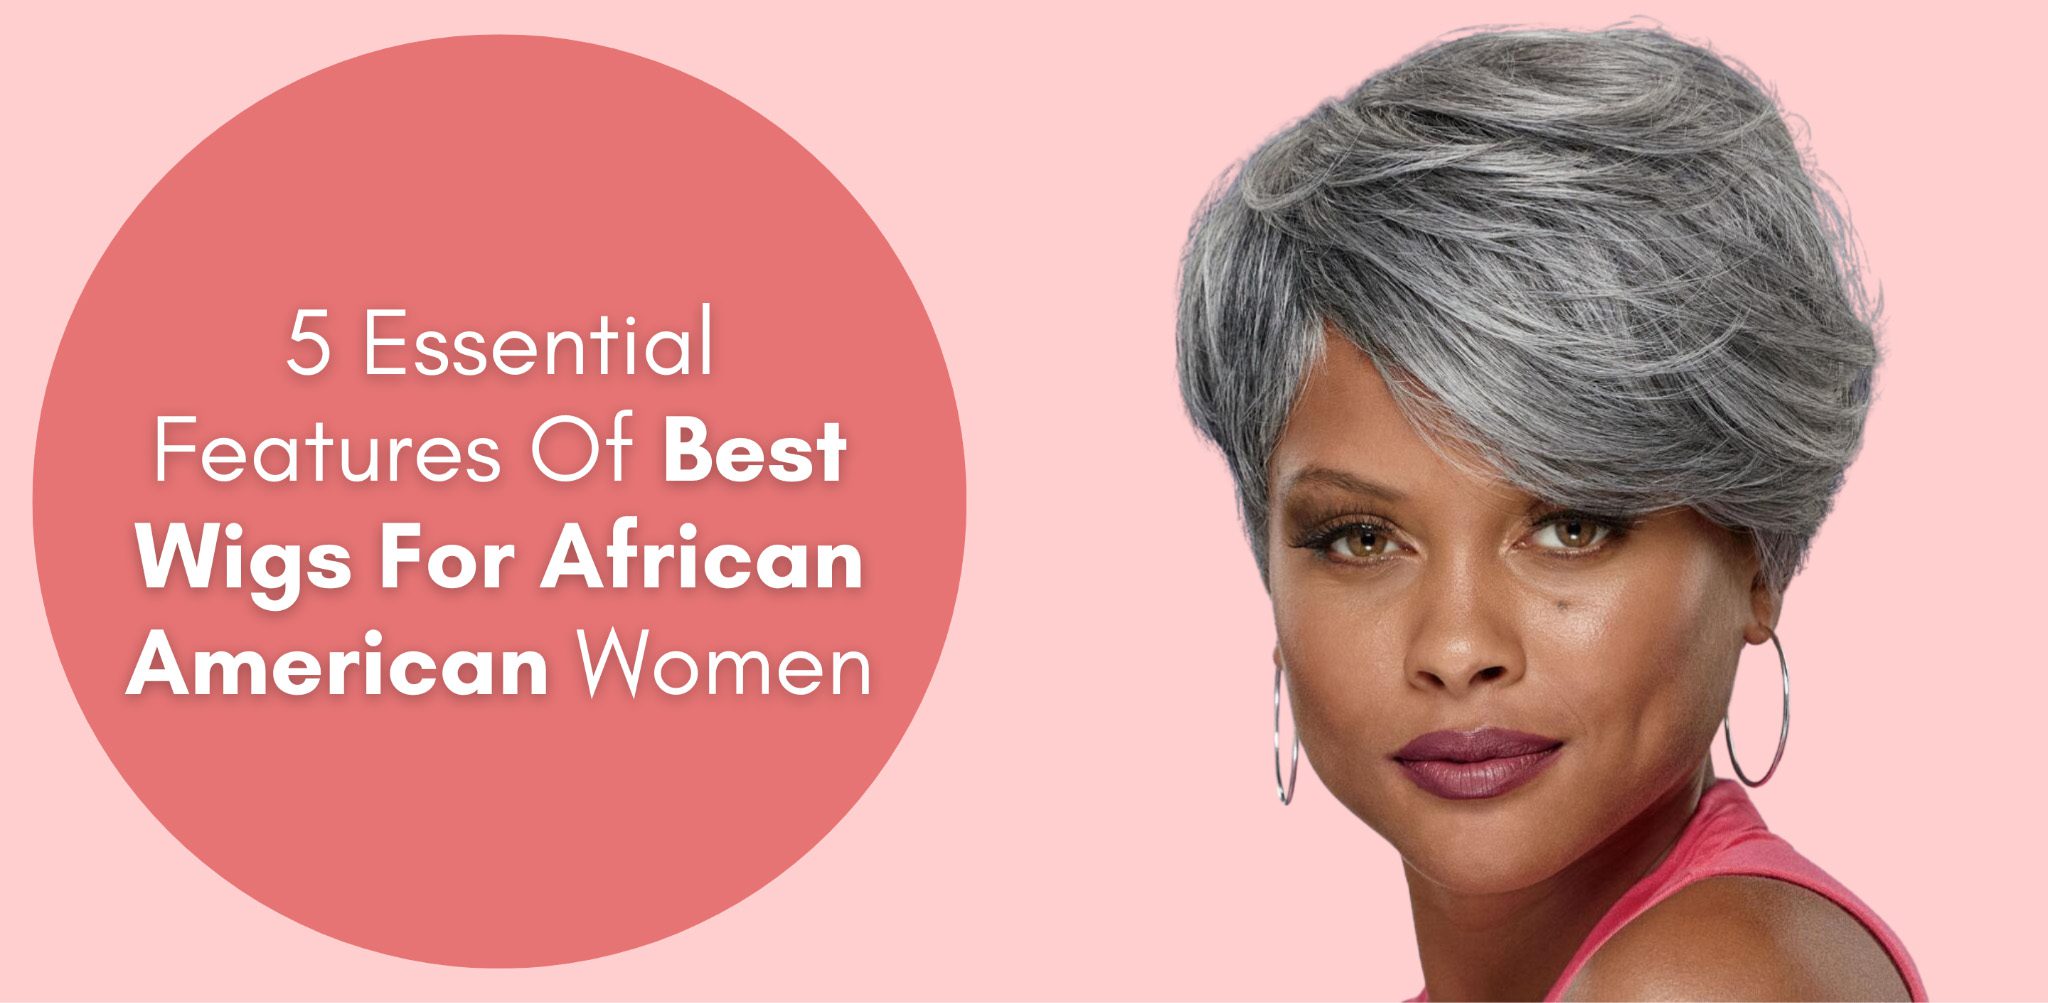 5 Essential Features Of Best Wigs For African American Women